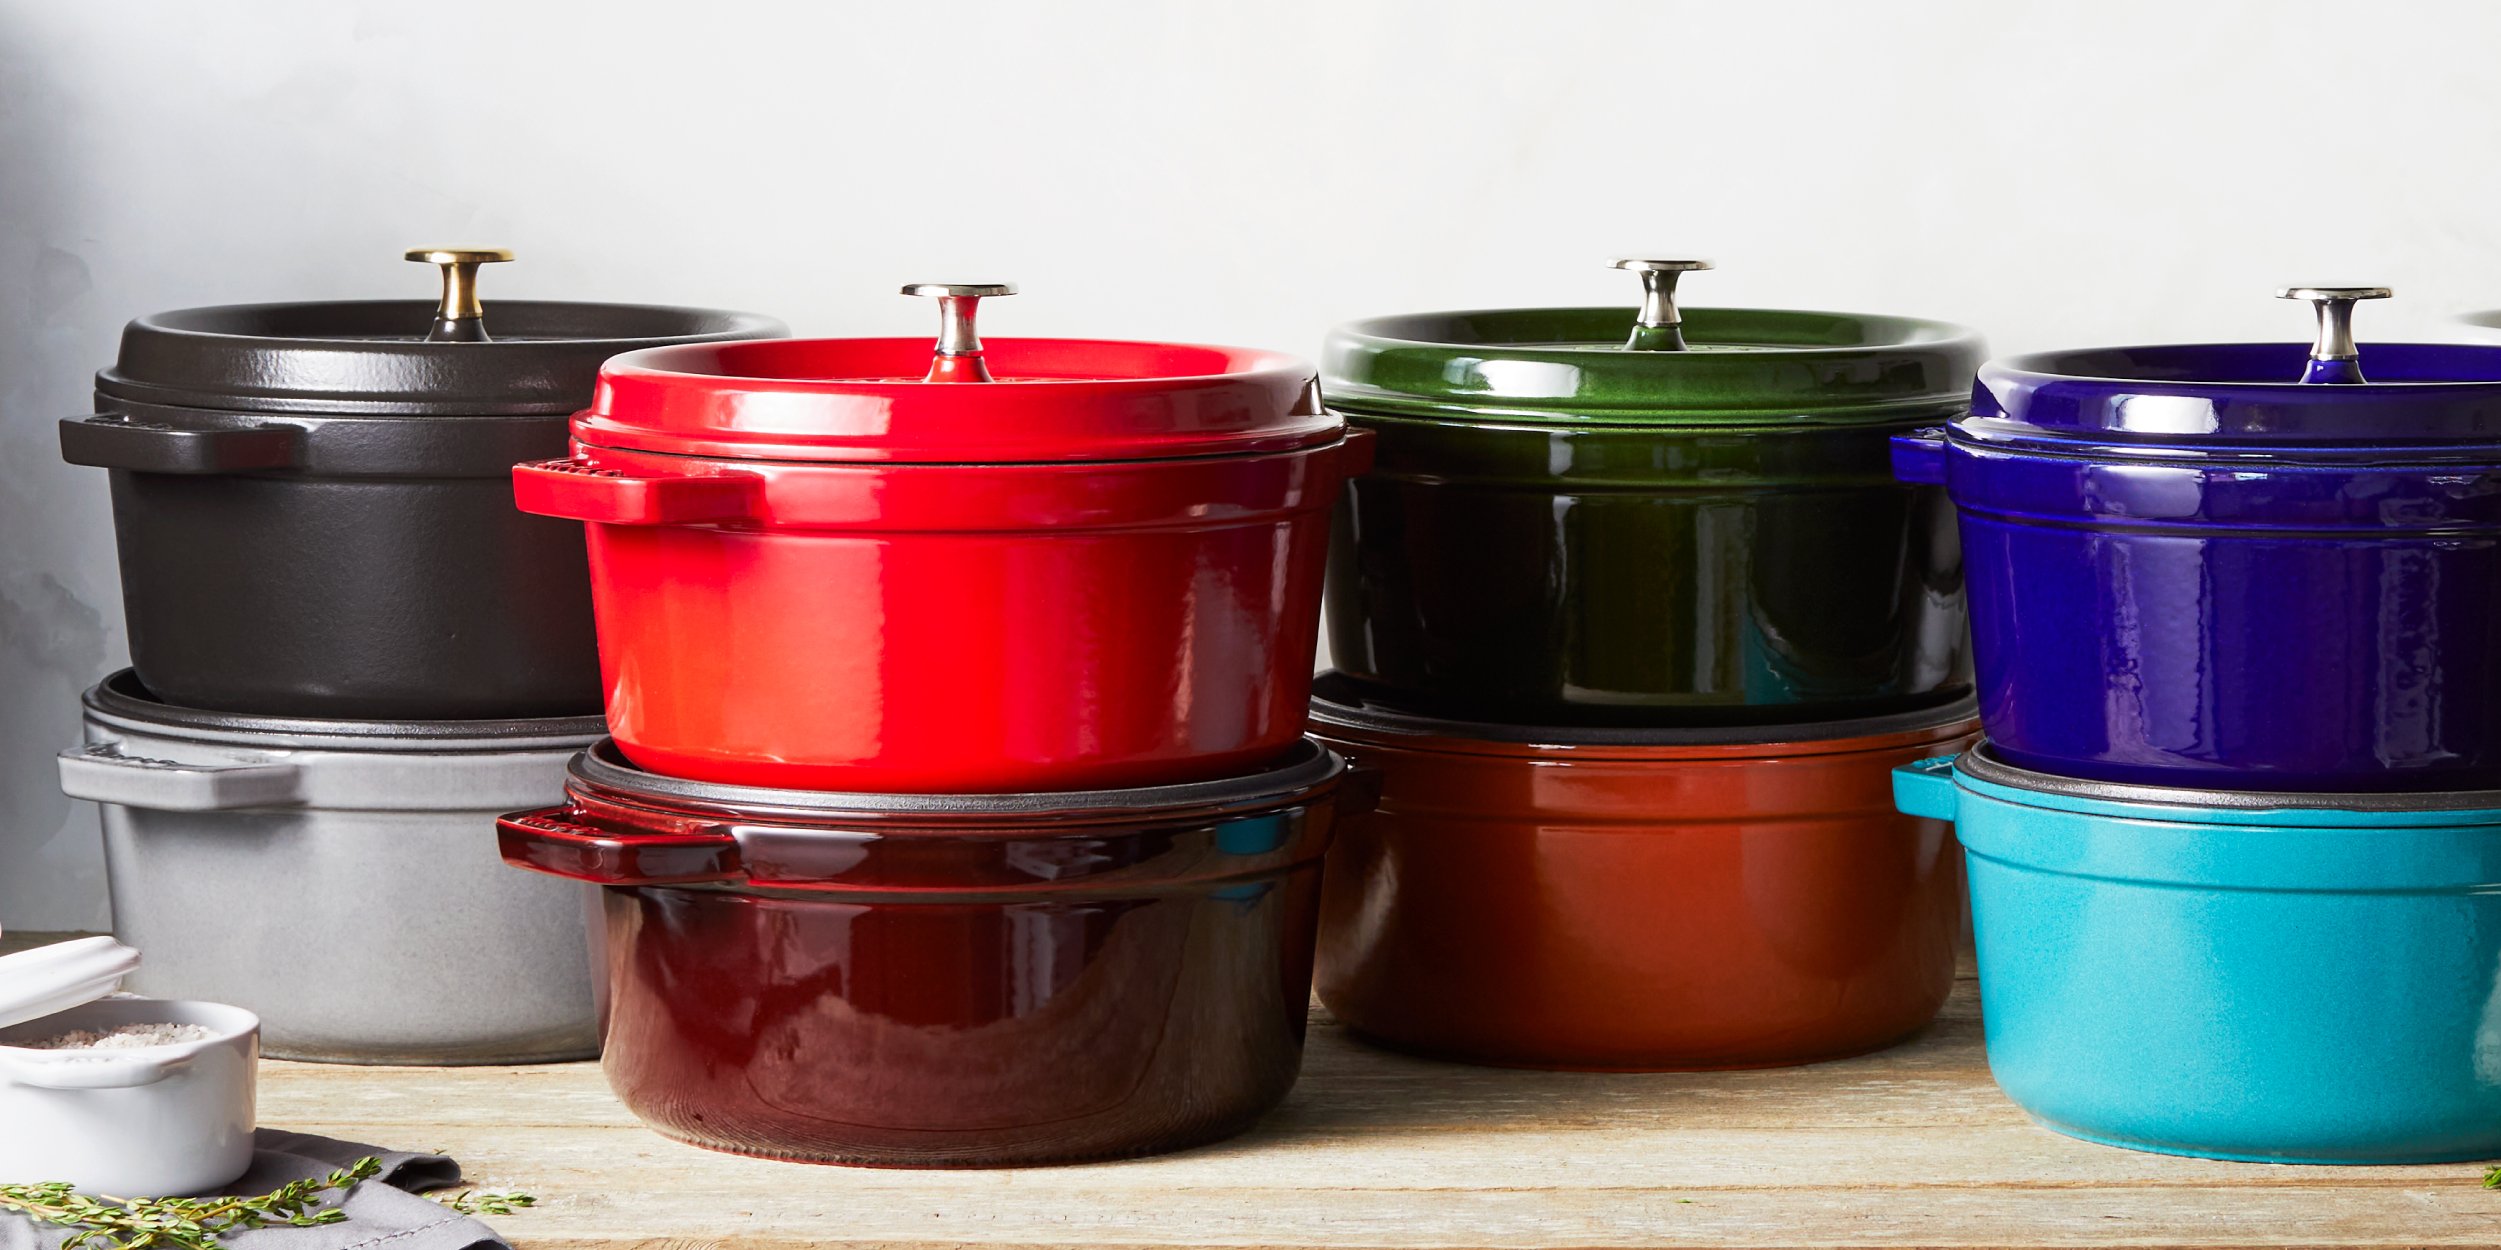 https://www.zwilling.com/on/demandware.static/-/Sites-zwilling-us-Library/default/dwcd272ecb/images/product-content/masonry-content/staub/cast-iron/cocotte/Cocottes_Mason_Comp_1200-600_DailyPanMasonry.jpg